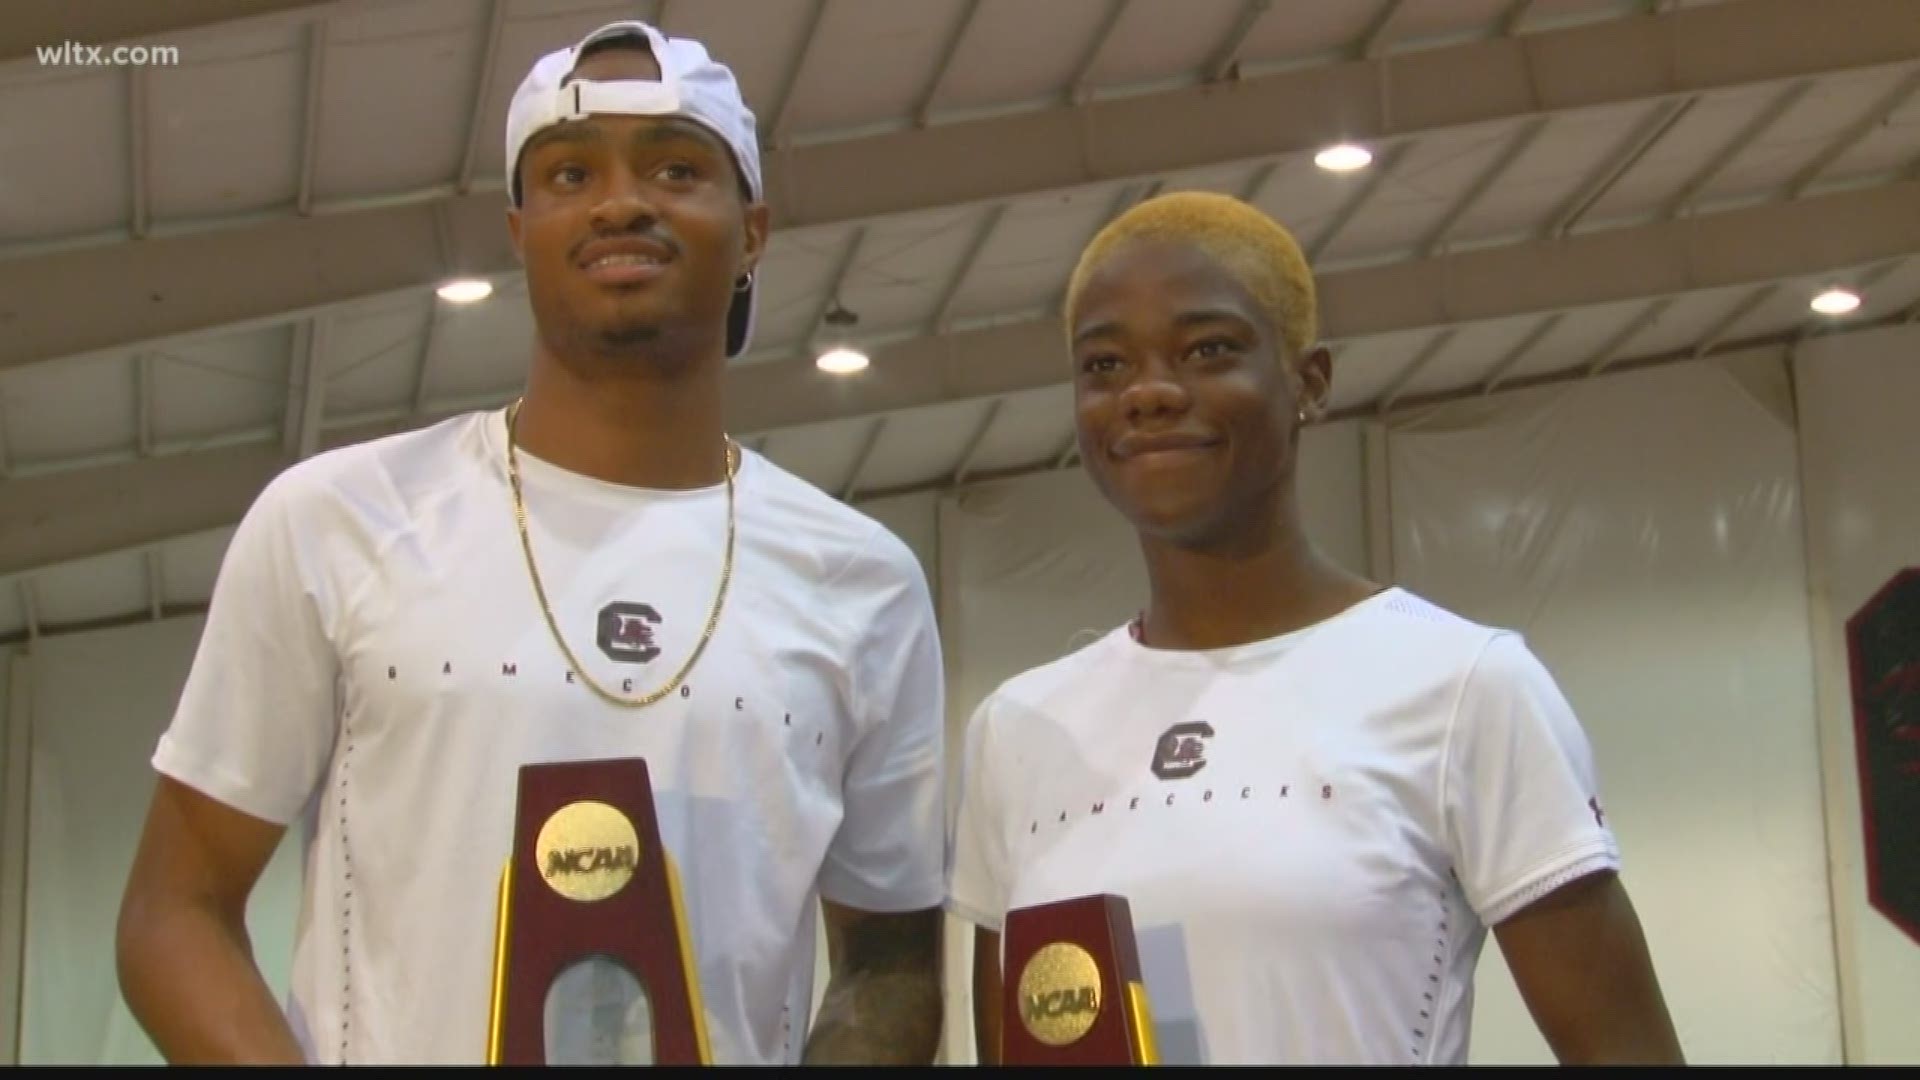 Wadeline Jonathas and Quincy Hall bring home the NCAA titles in the women's 400 meters and men's 400 meter hurdle evens. Both are transfers and have made long roads to become champions. Wadeline hopes to be an inspiration in her native Haiti and Quincy is thankful for his humbling experience in JUCO college that him appreciate what he has at USC.